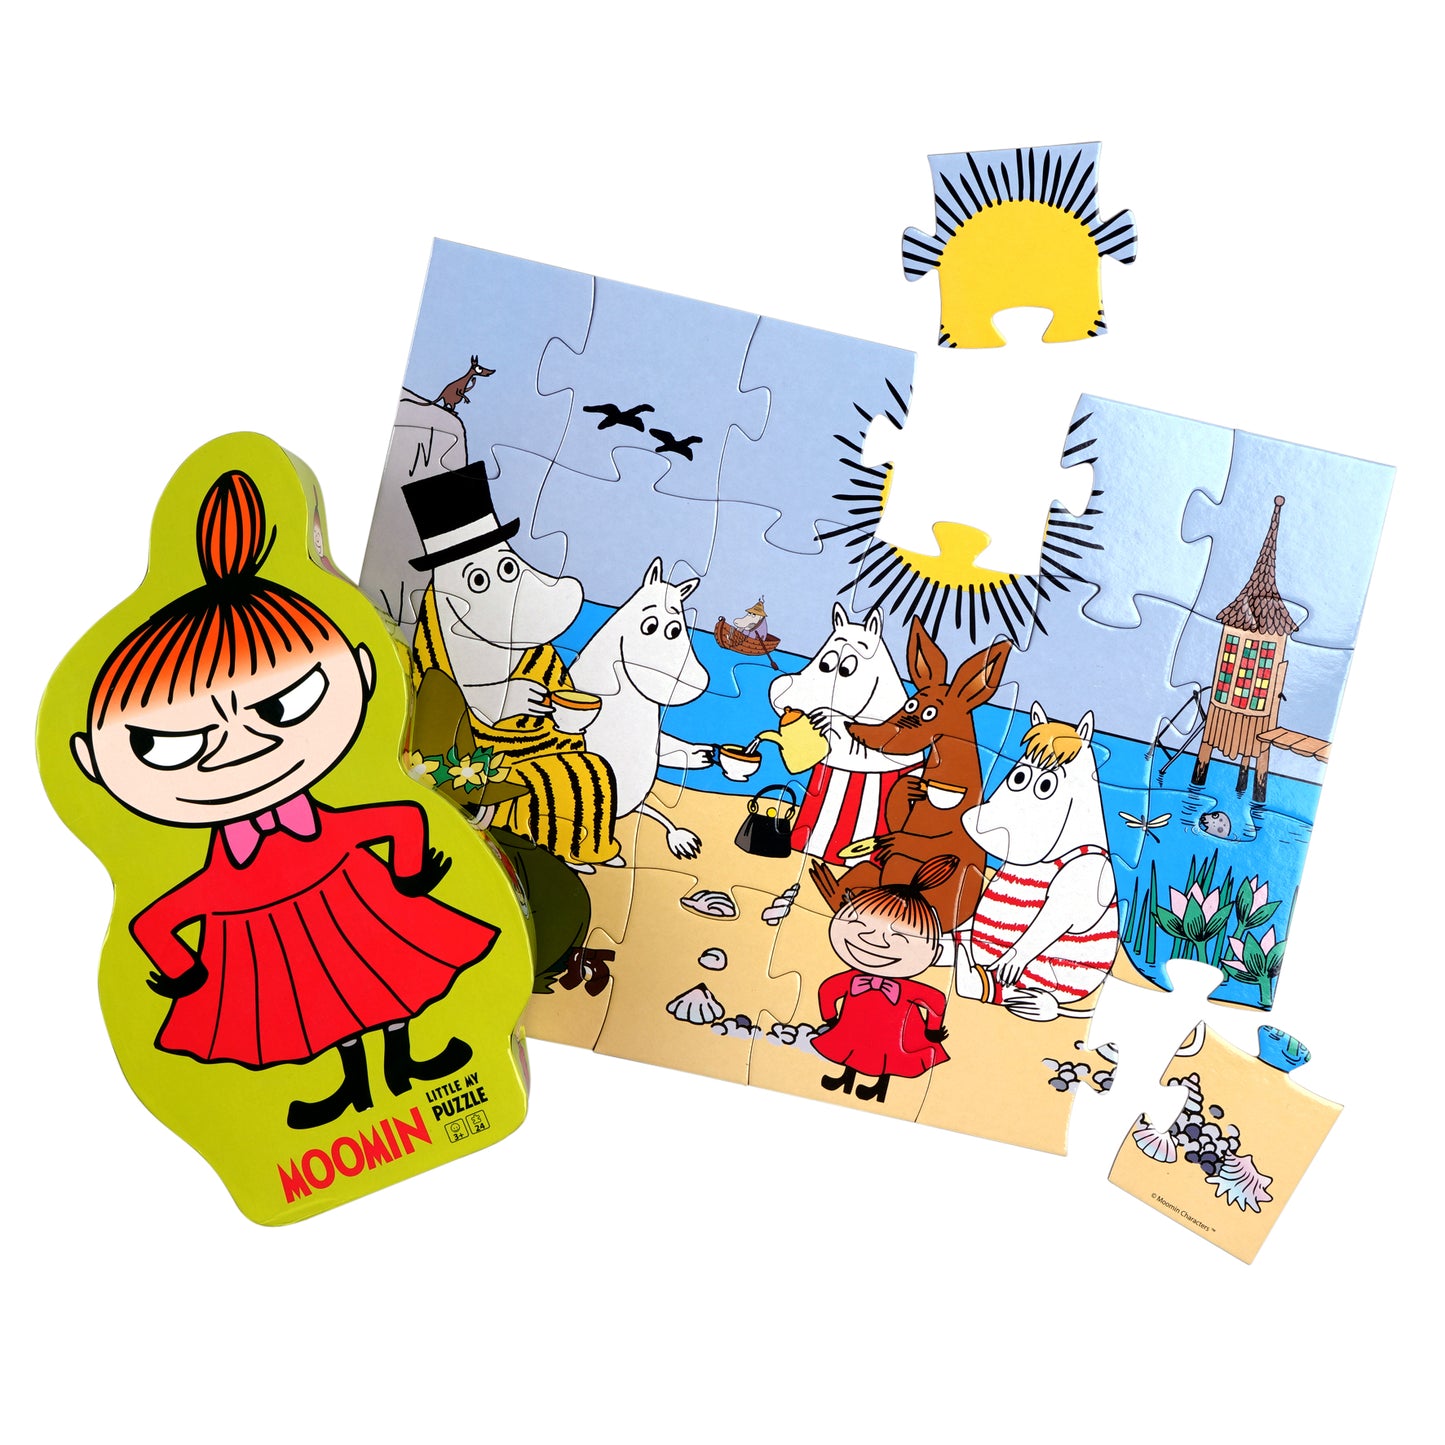 moomin little my deco puzzle box and puzzle pieces